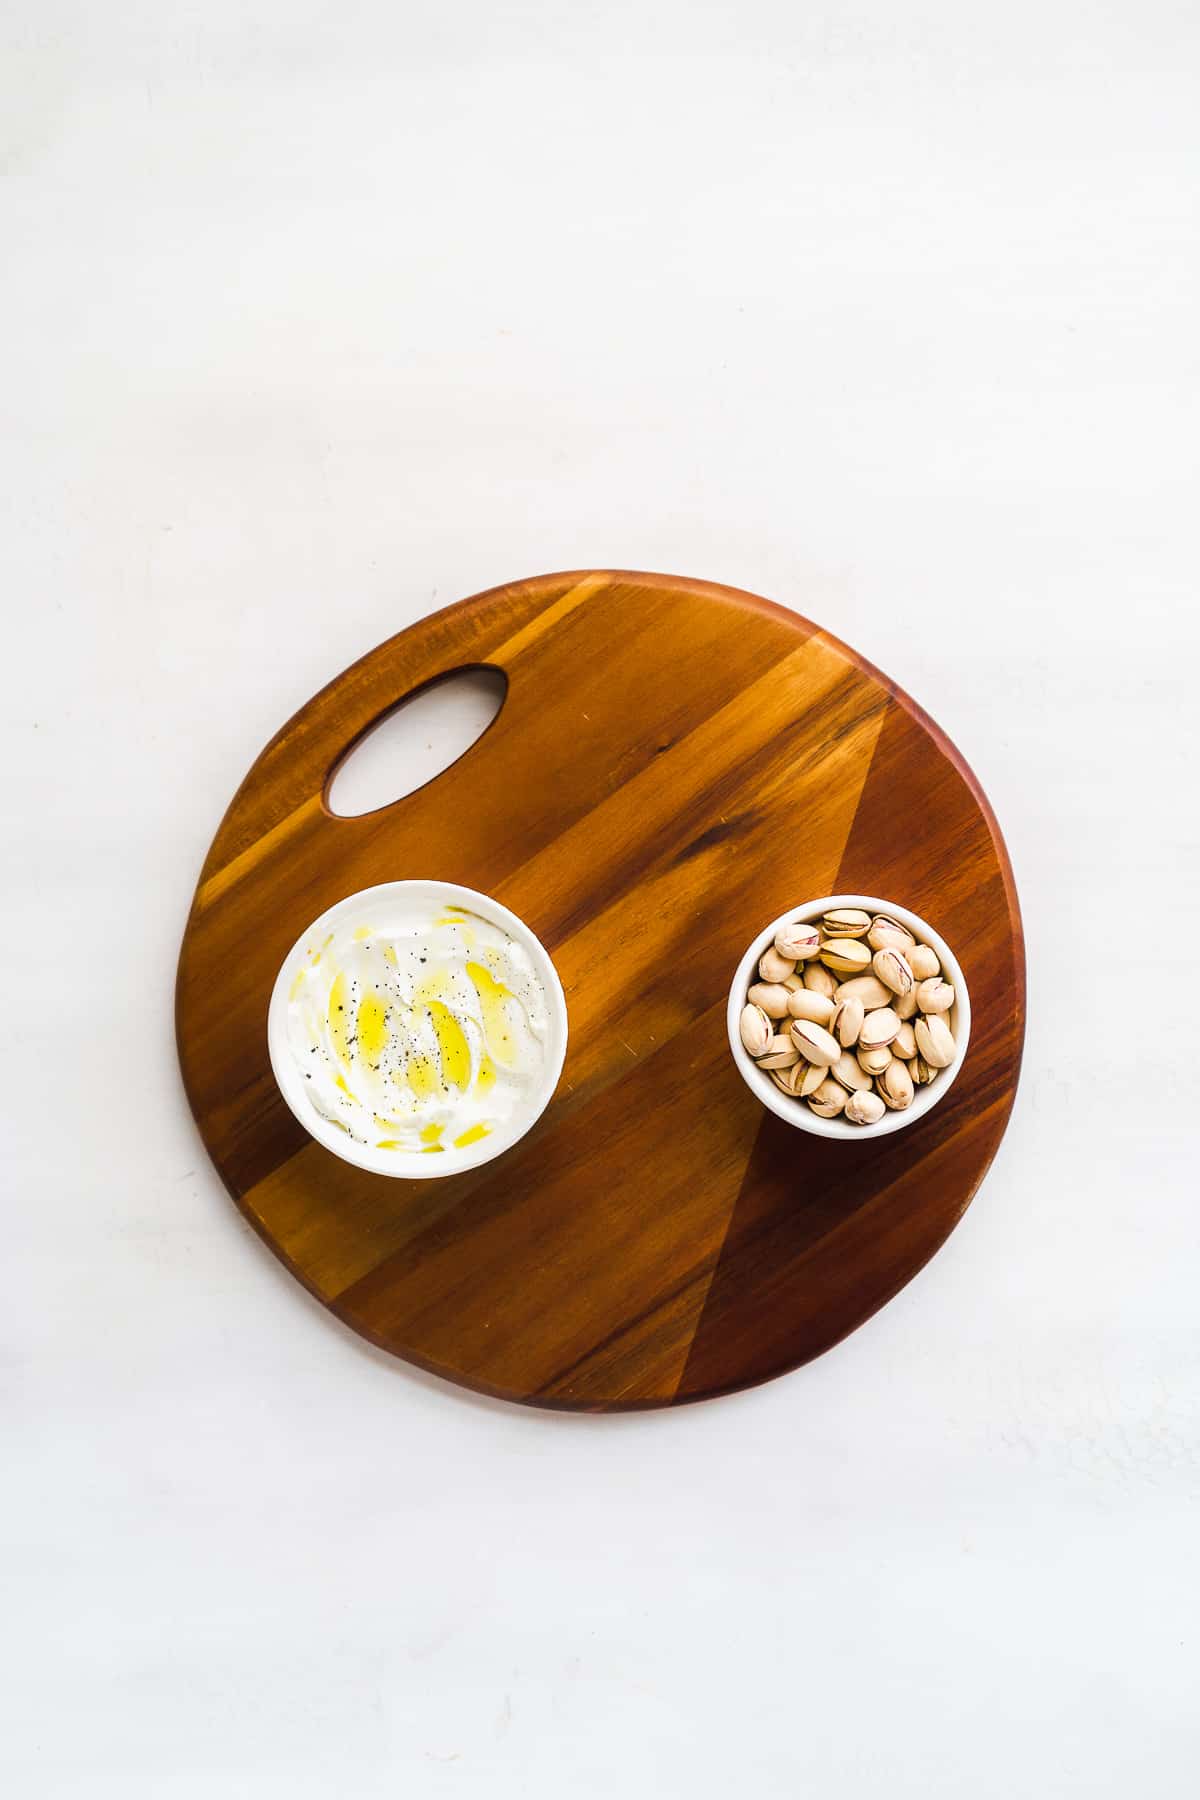 Wooden circular platter with two bowls on it on a white surface.